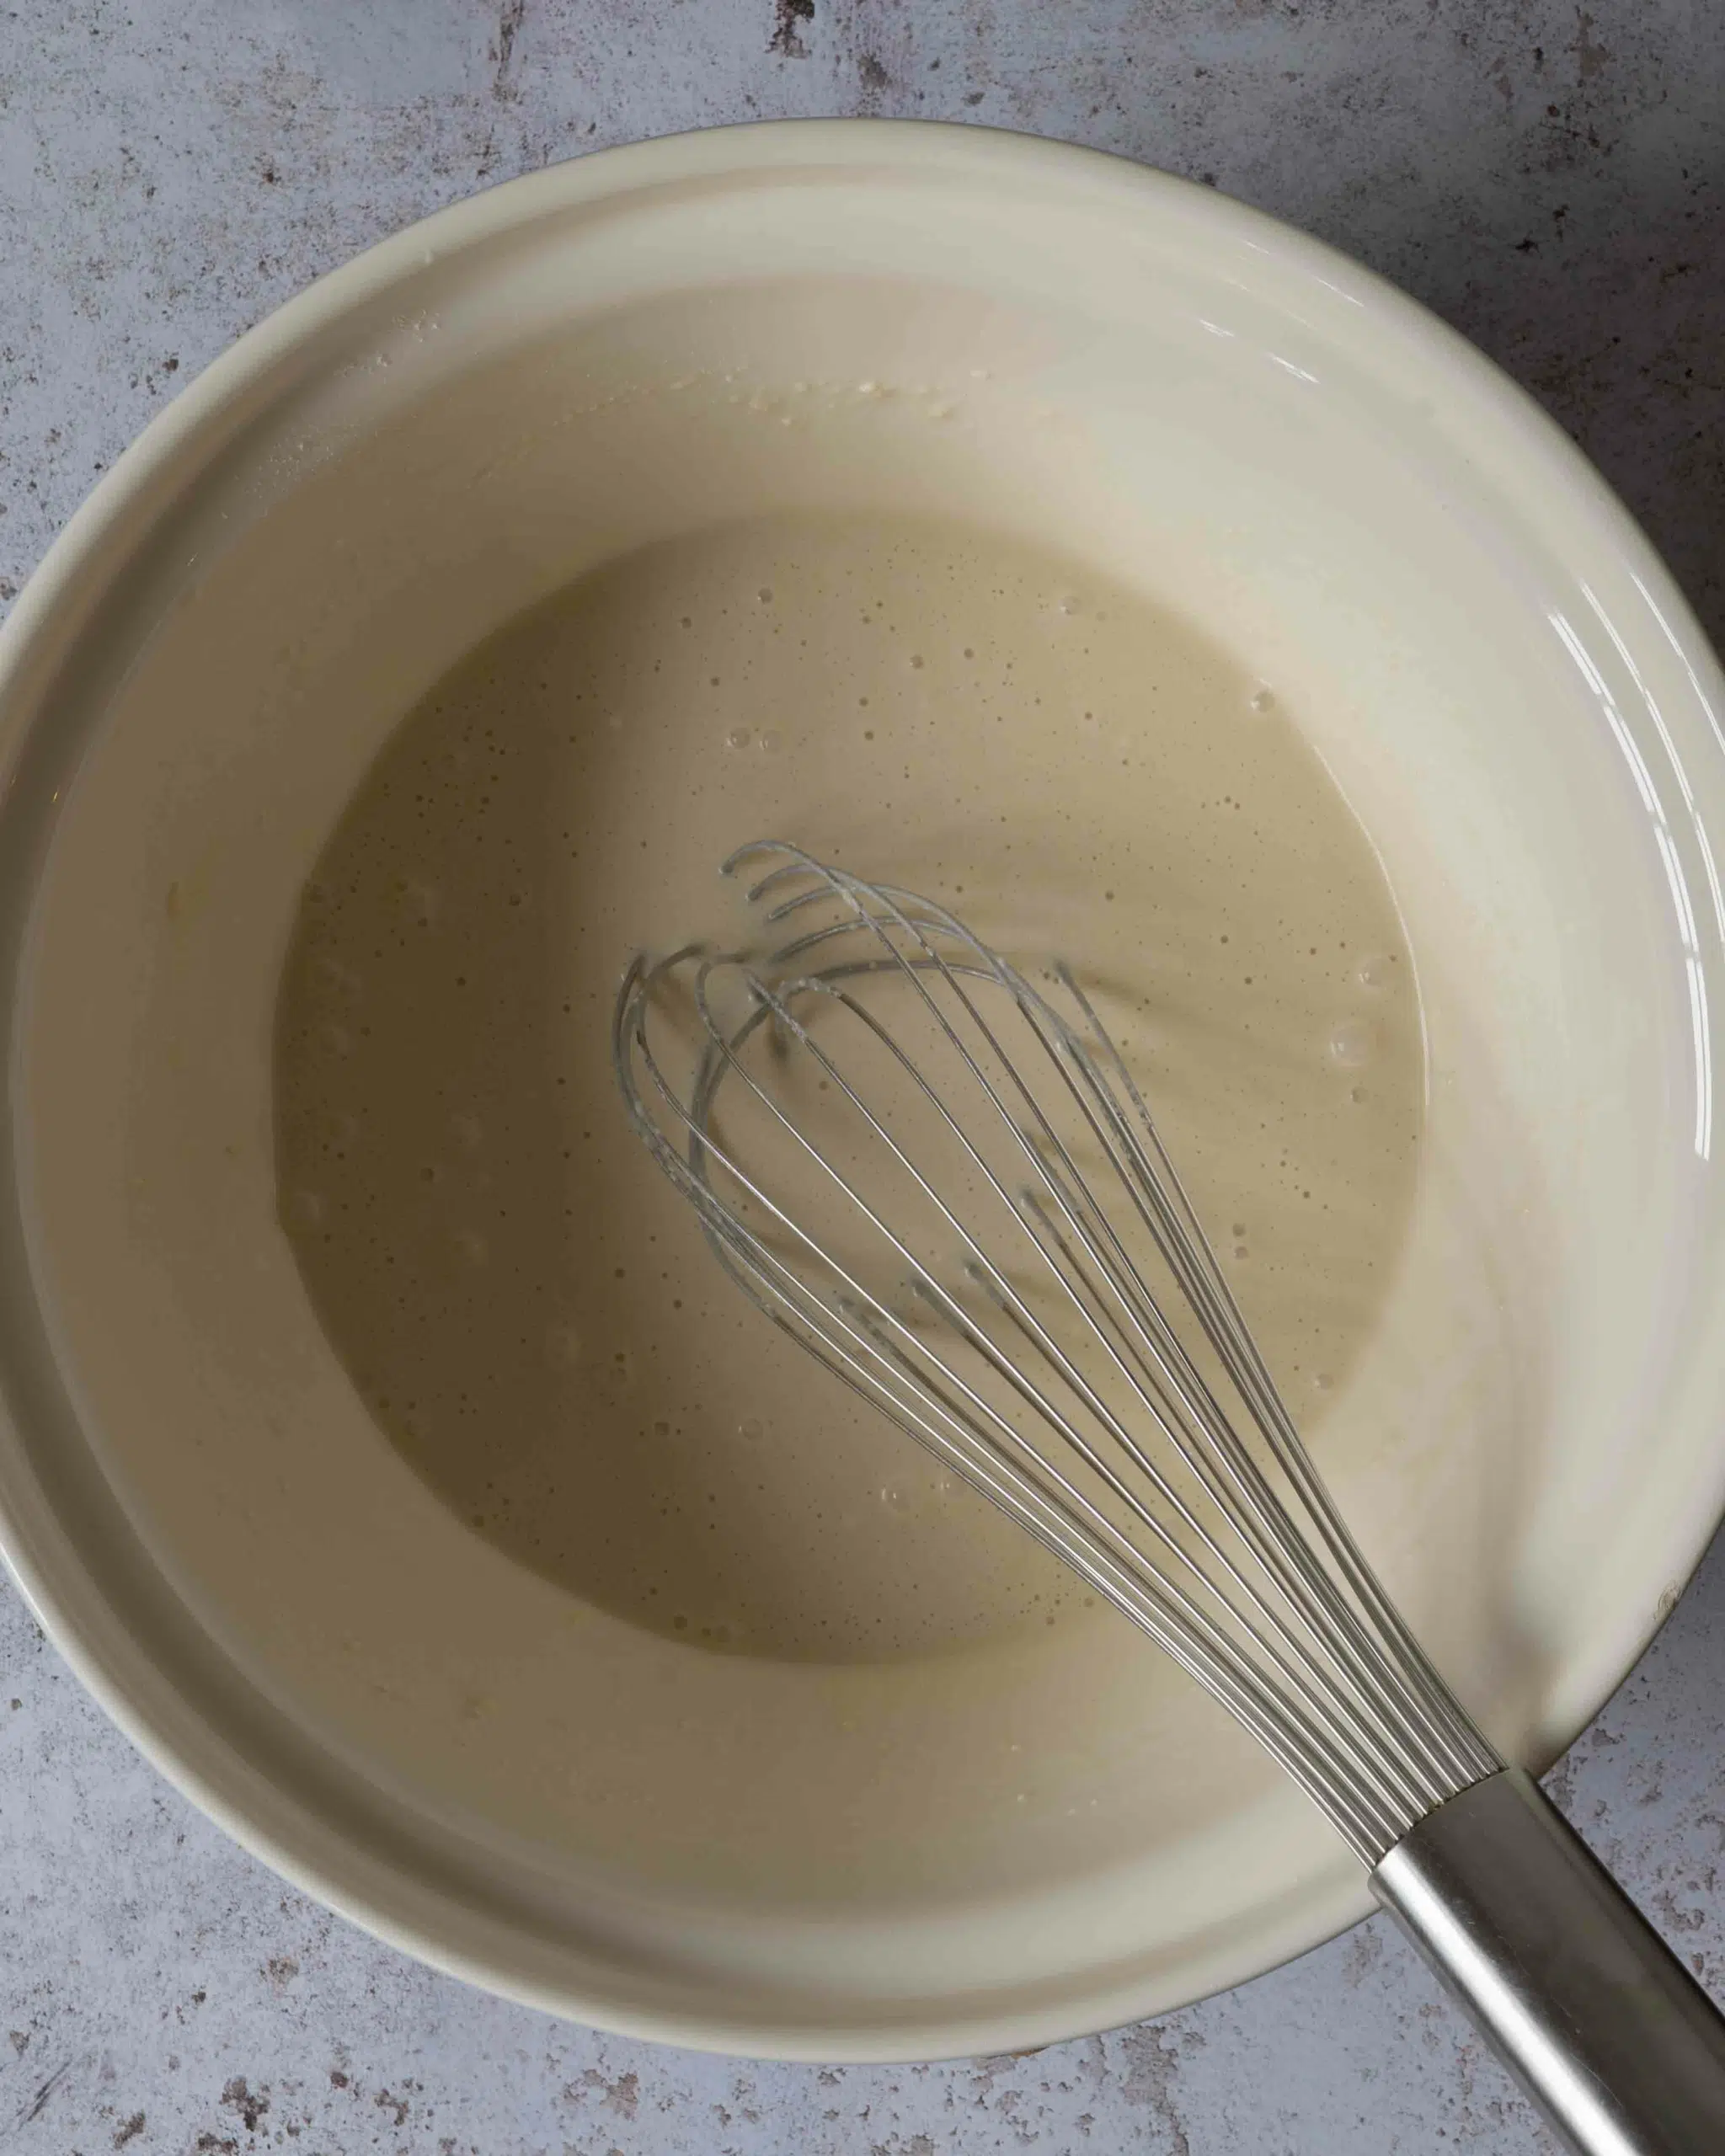 A bowl of freshly mixed cake batter